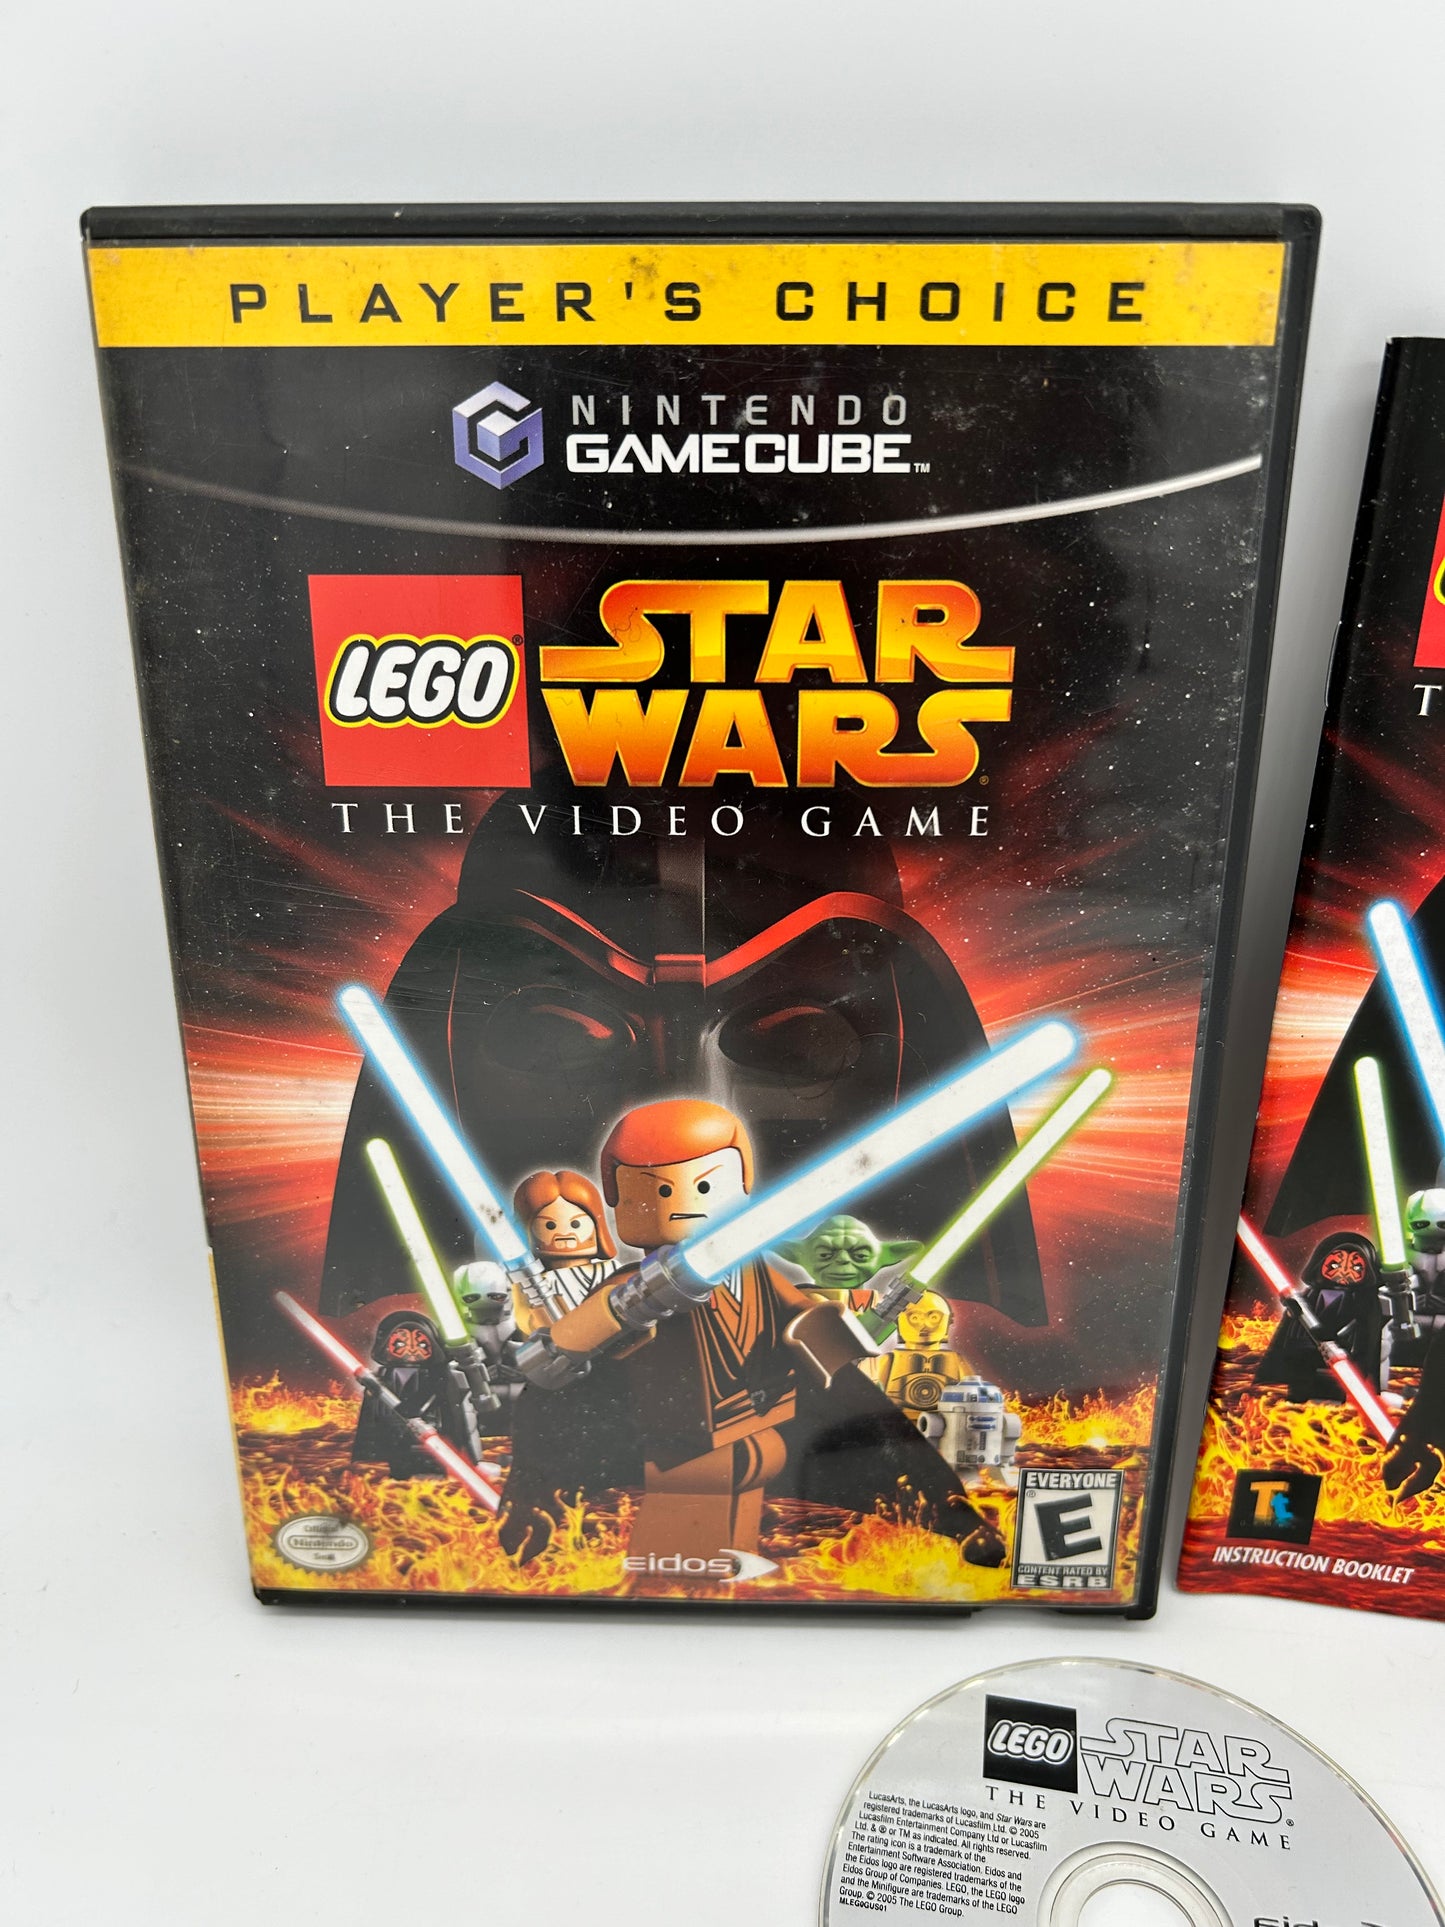 NiNTENDO GAMECUBE [NGC] | LEGO STAR WARS THE VIDEO GAME | PLAYERS CHOiCE